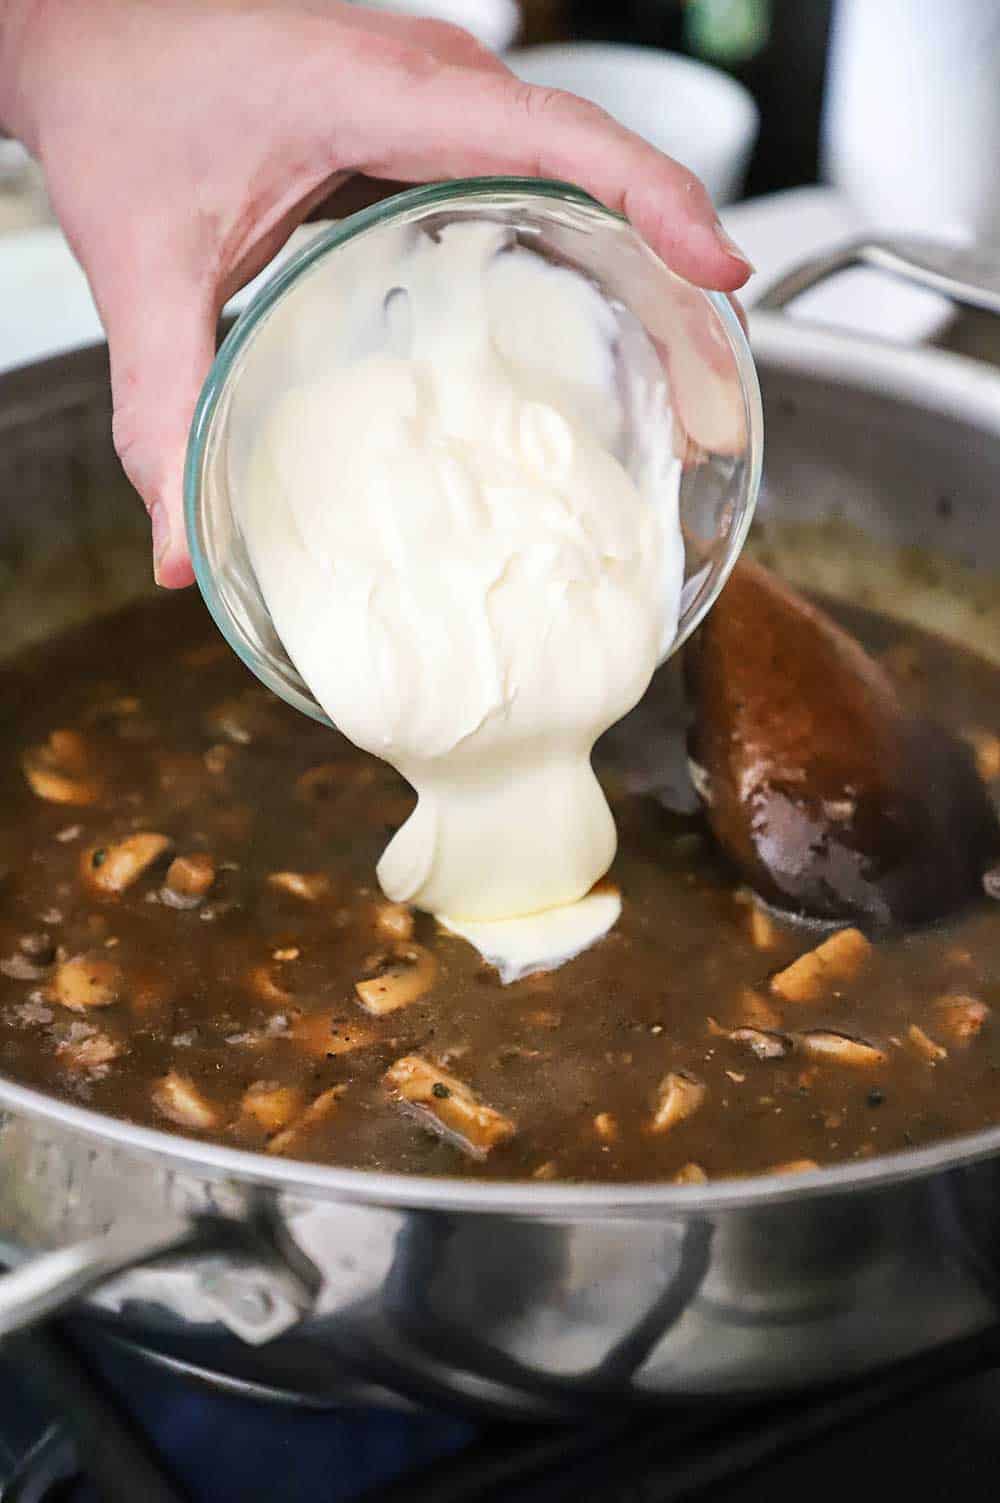 A person transferring softened crème fraîche from a glass bowl into a skillet filled with a dark brown gravy with mushrooms.